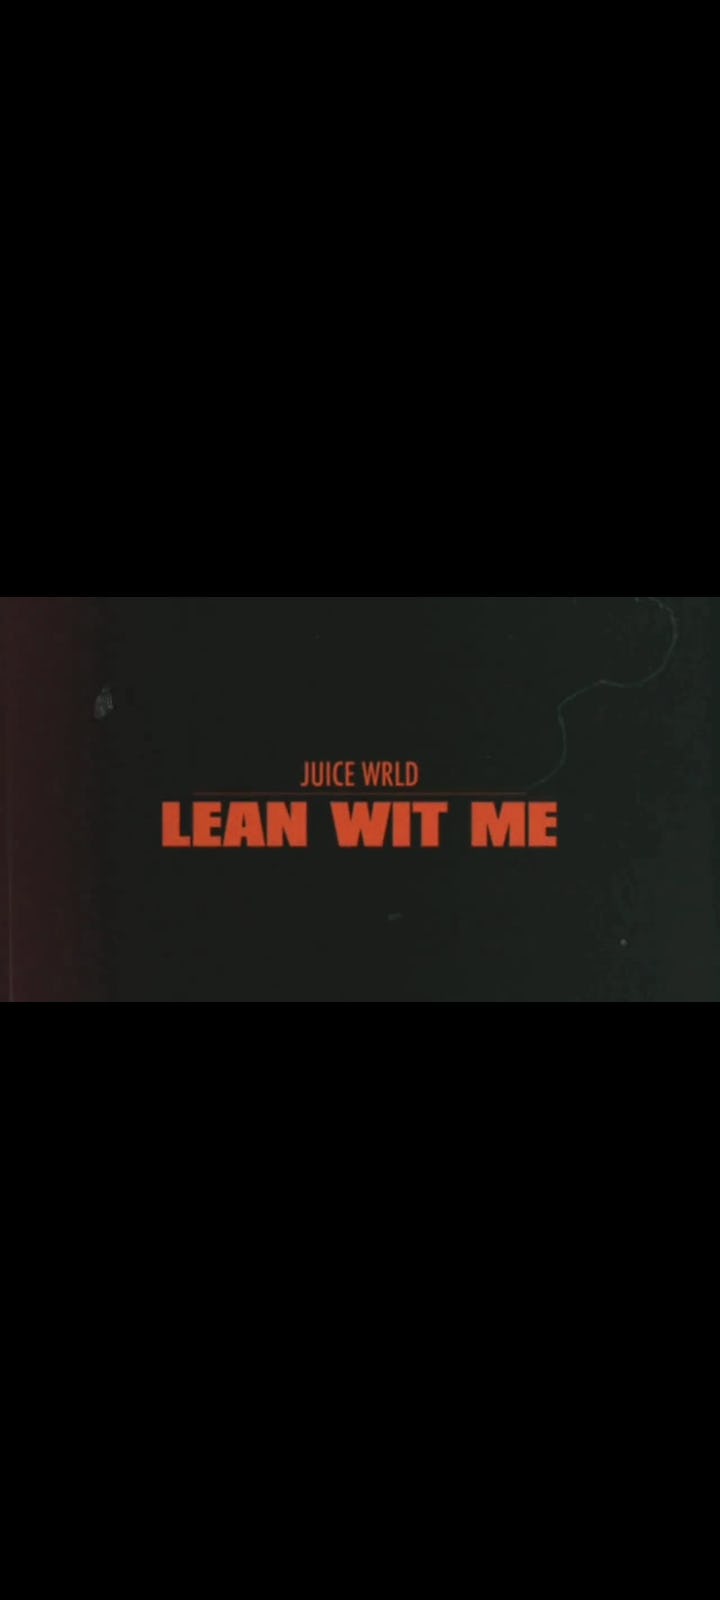 N.W.A Juice WRLD - Lean Wit Me with Coolio - Gangsta's Paradise
Remix song part 1